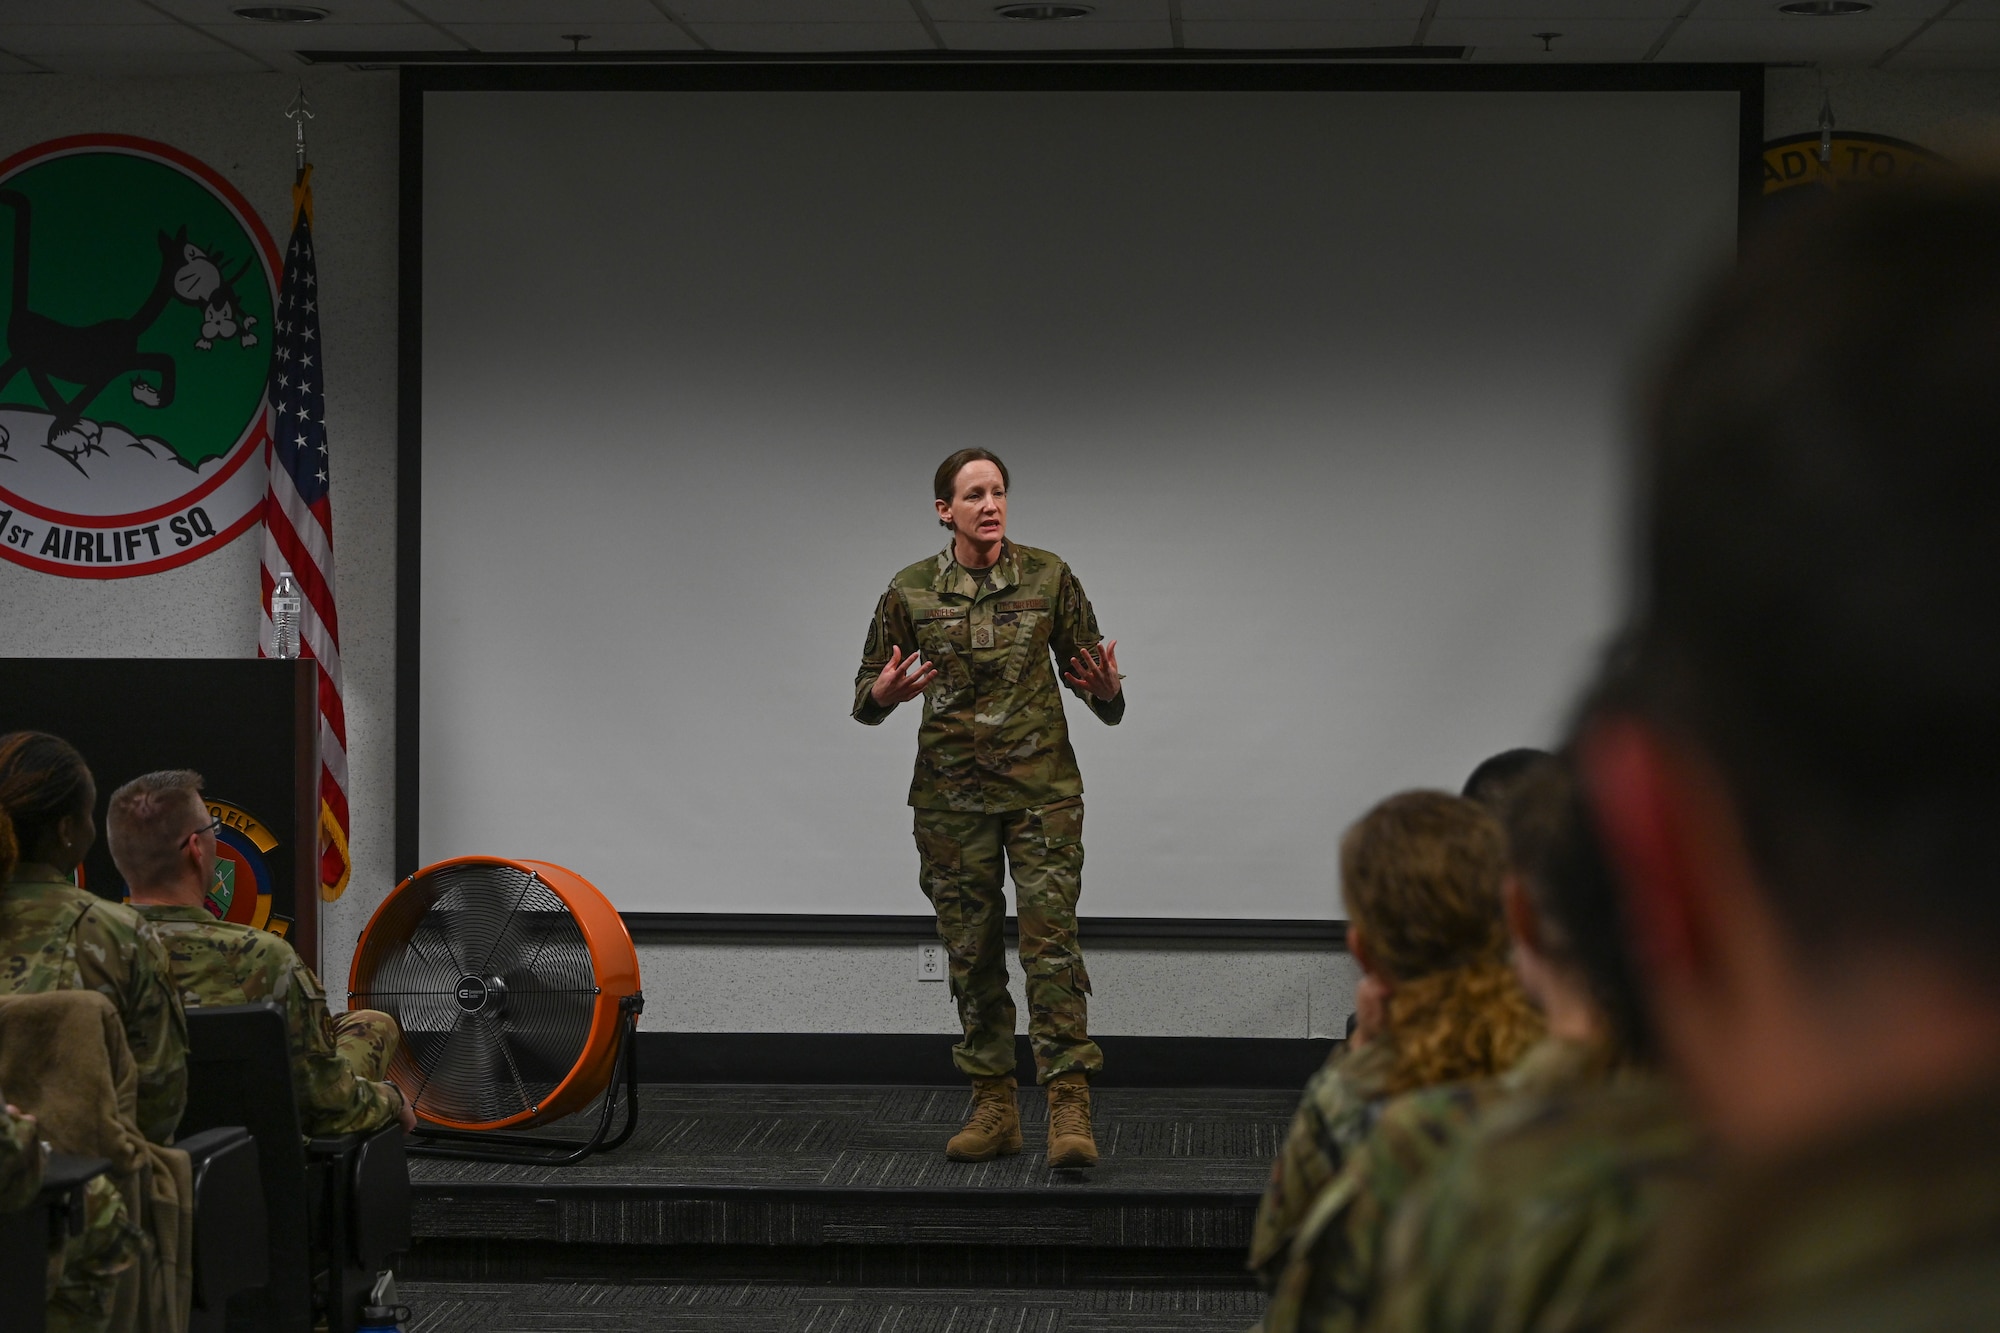 A woman in uniform stands on a stage.